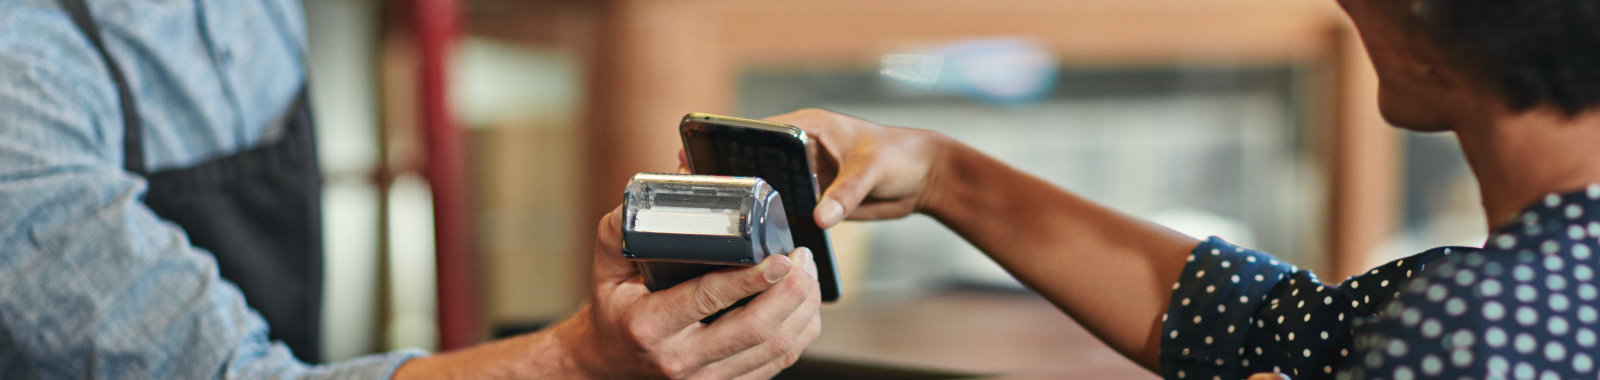 Paying with phone